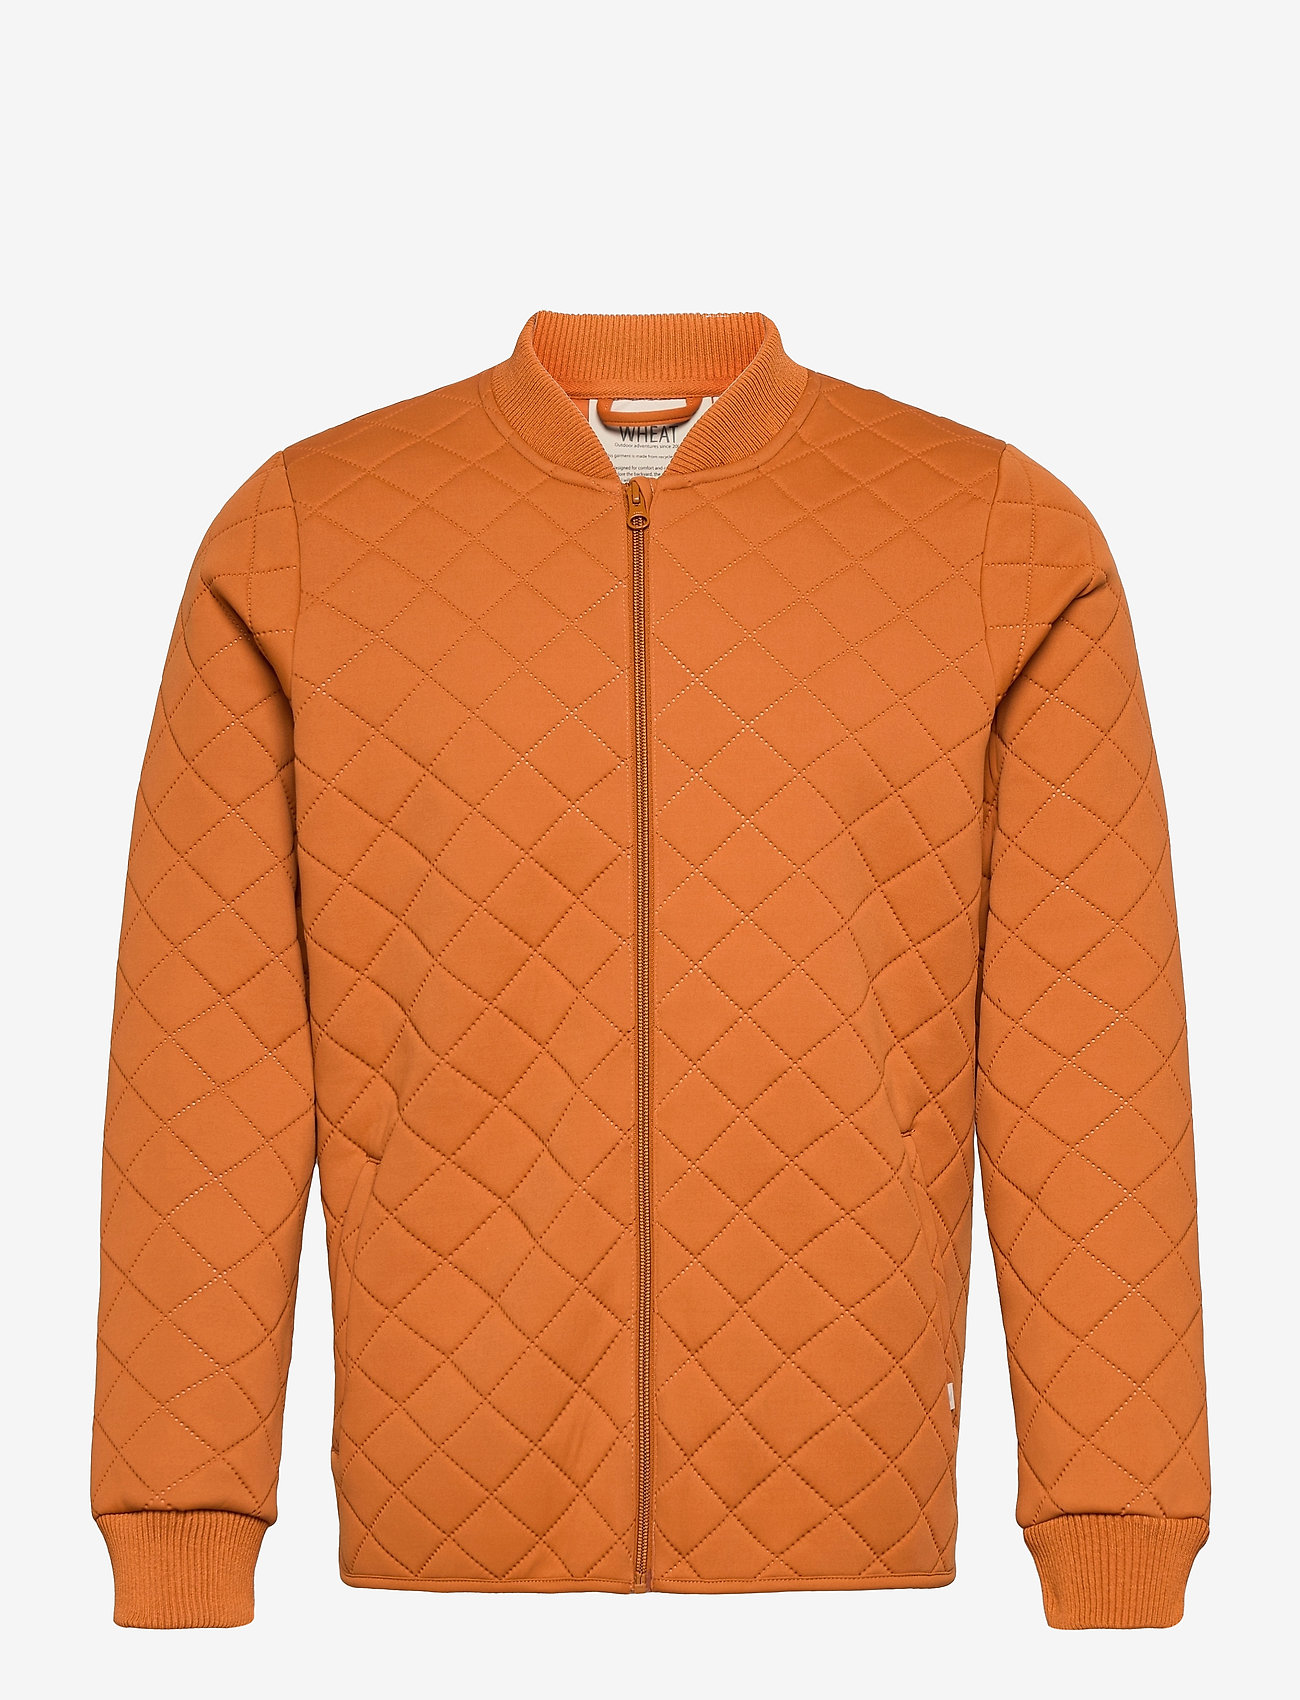 Wheat - Thermo Jacket Loui adult - spring jackets - terracotta - 0